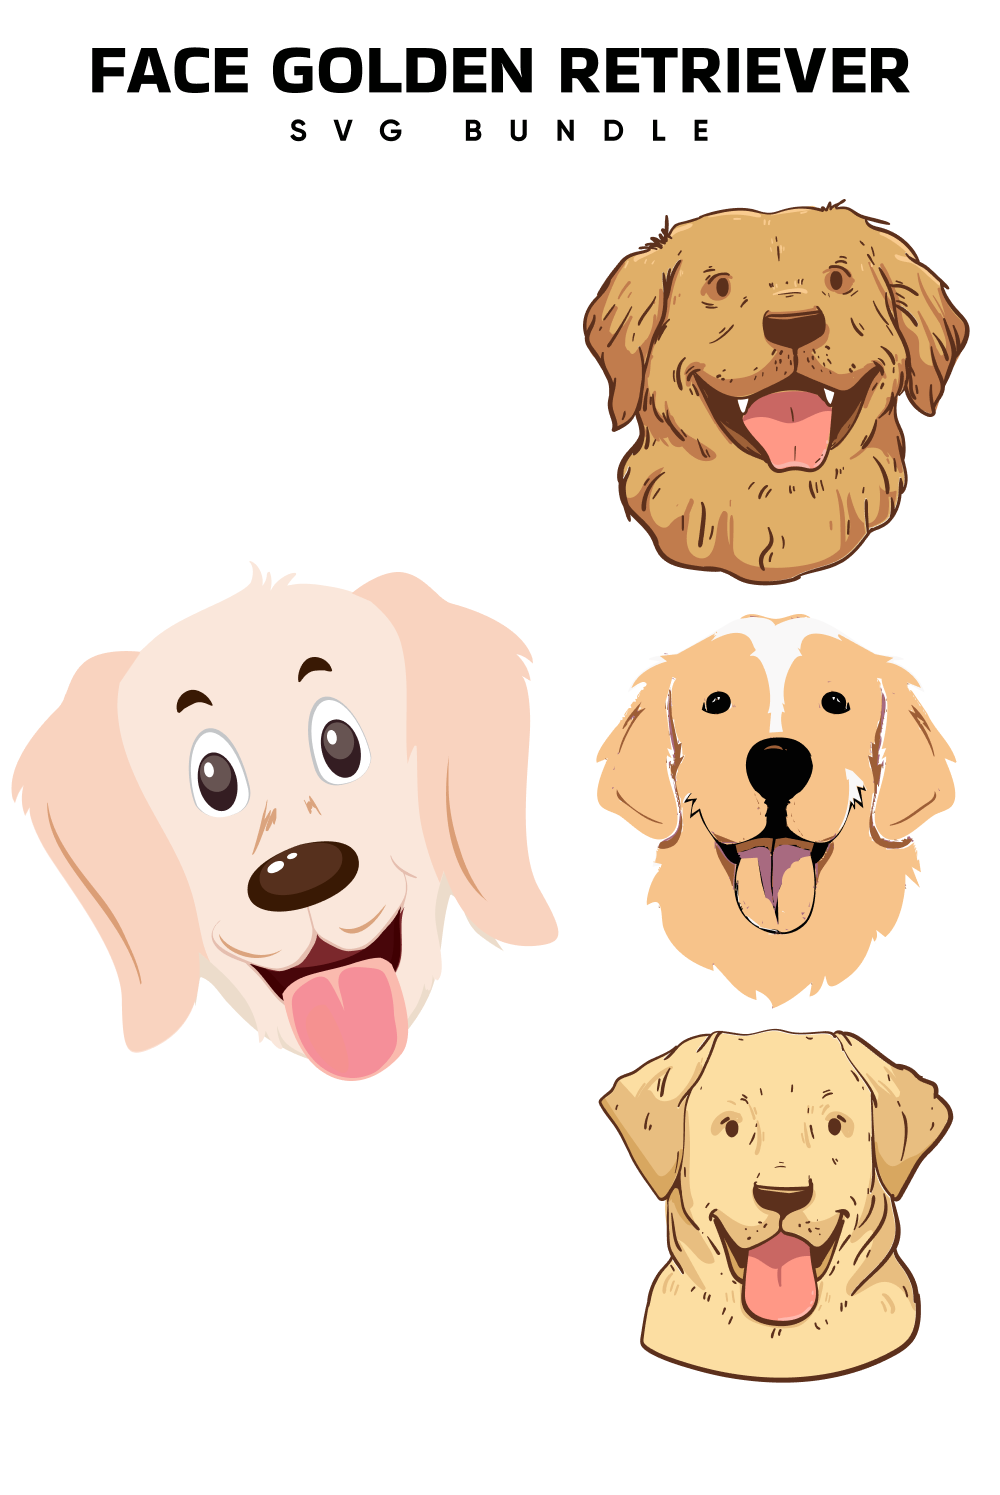 Dog's face is shown in four different colors.